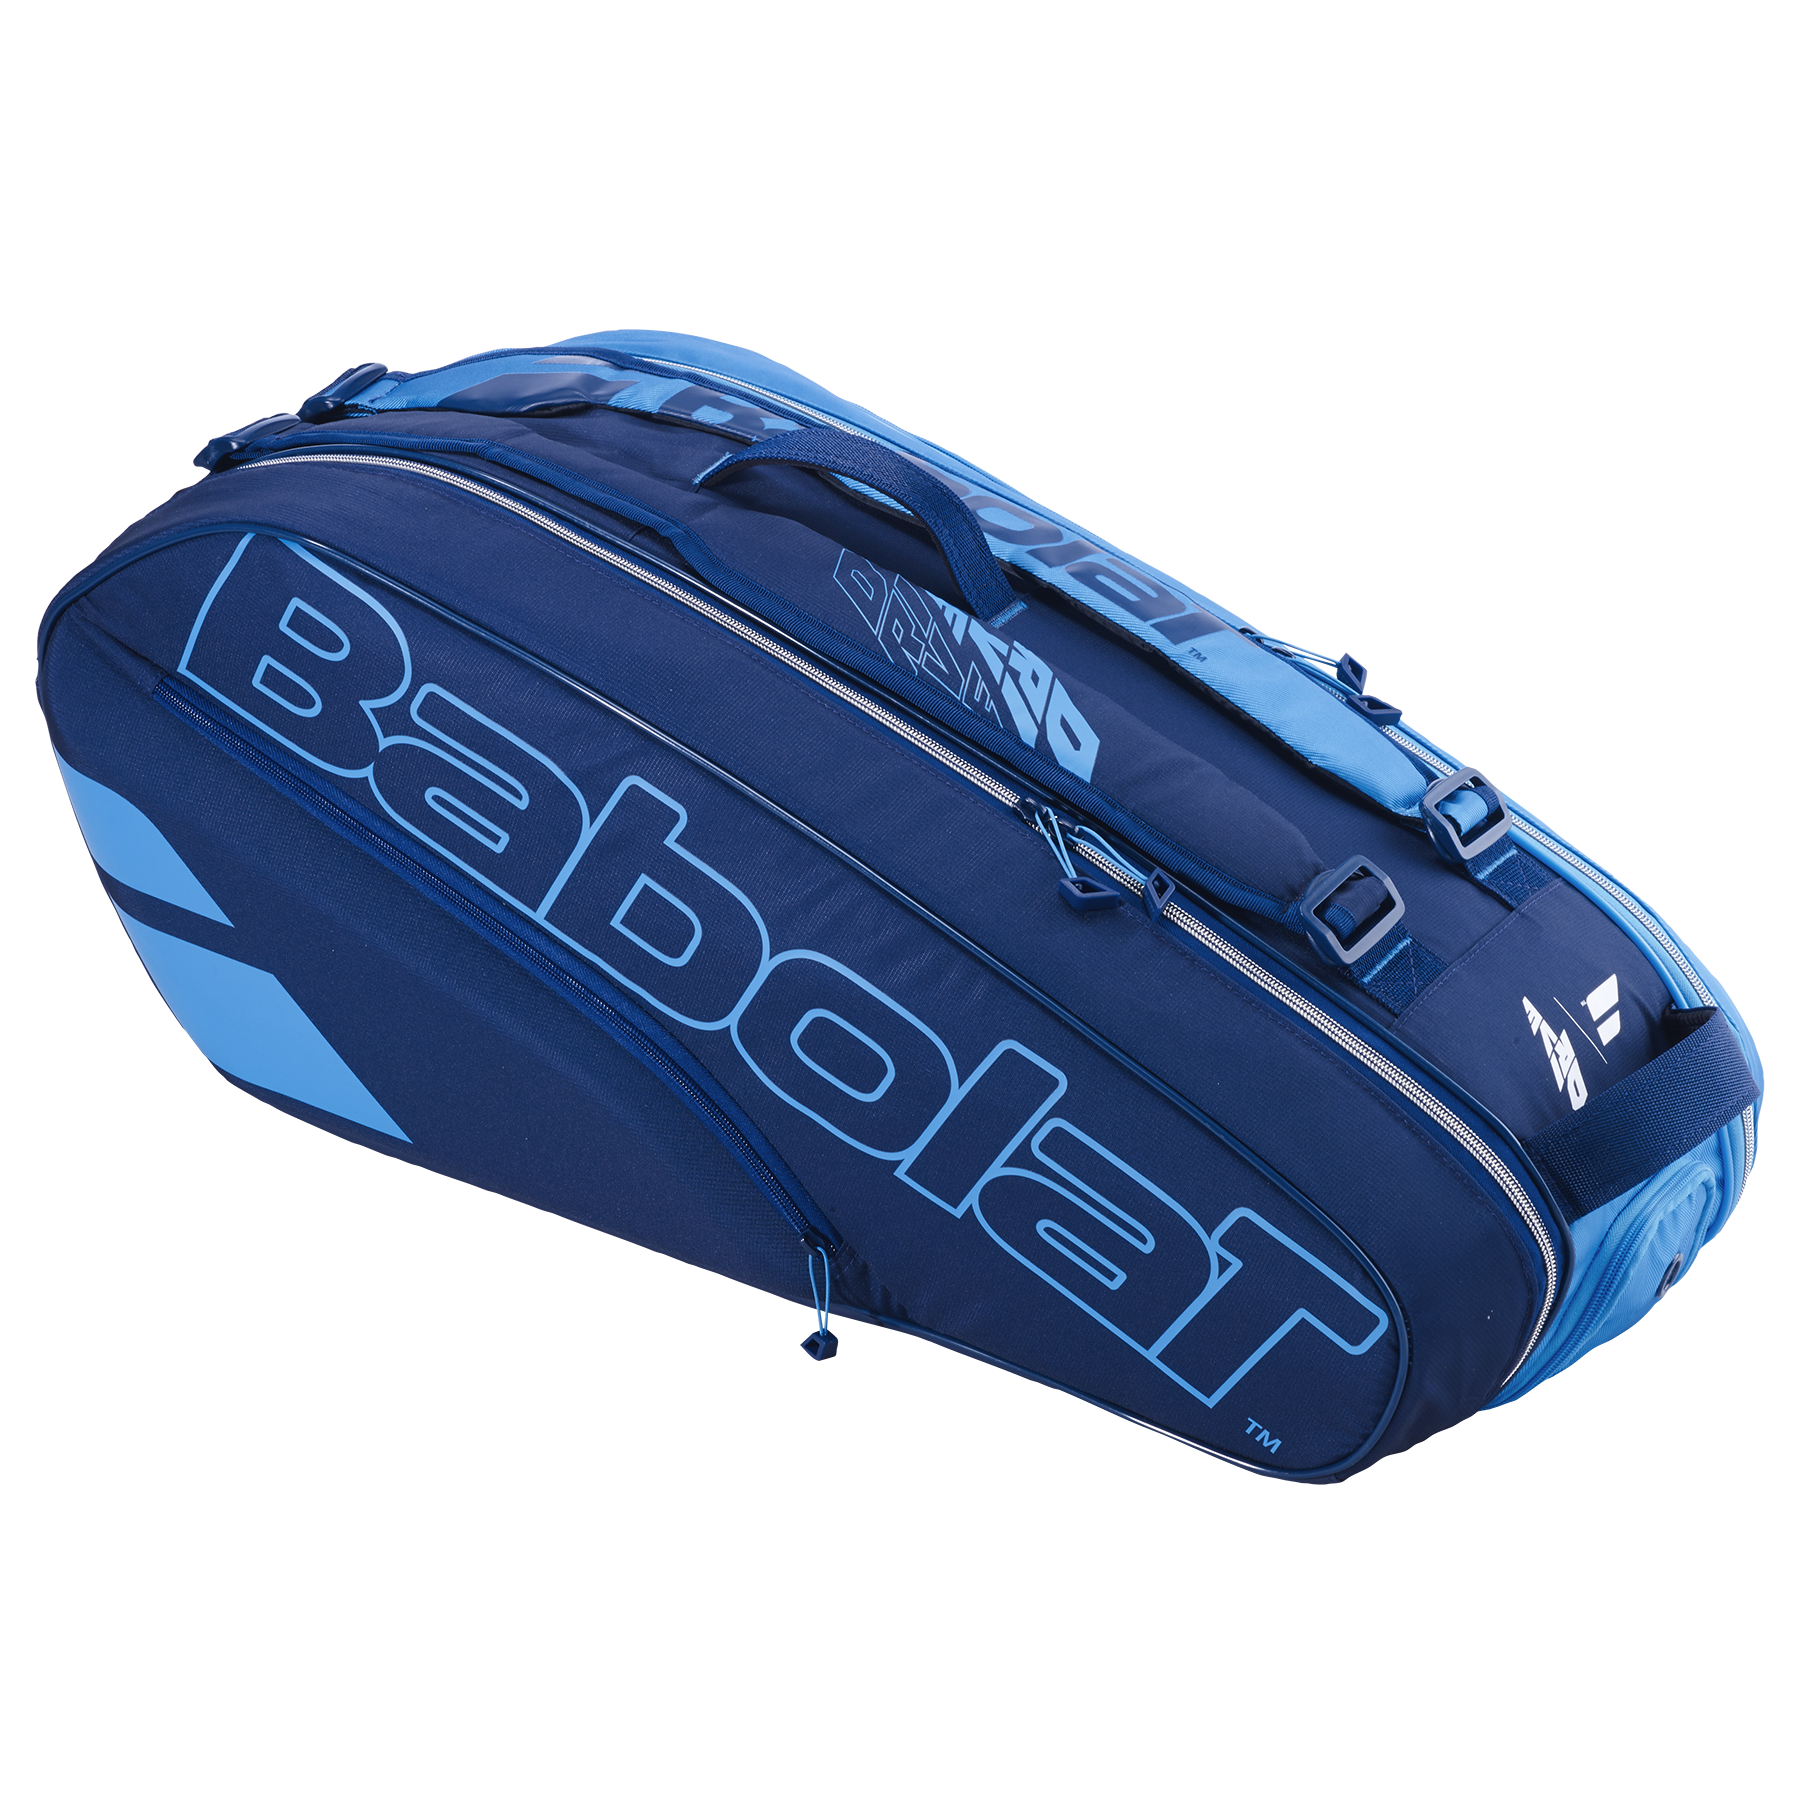 Babolat Pure Drive RH x6 2021 Tennis Bag - Tennis Topia - Best Sale Prices  and Service in Tennis